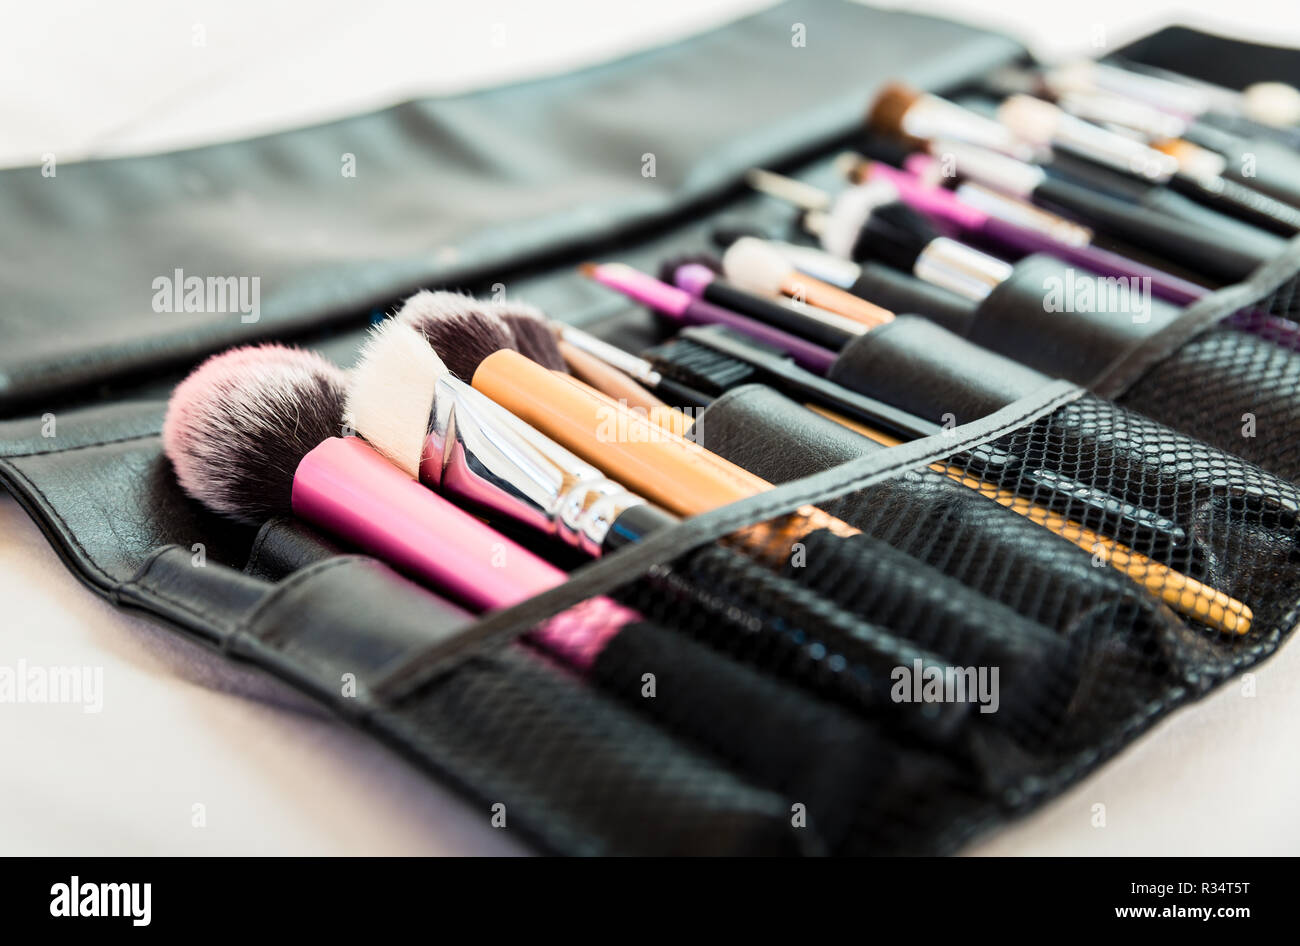 Close-up of different make-up brushes Stock Photo